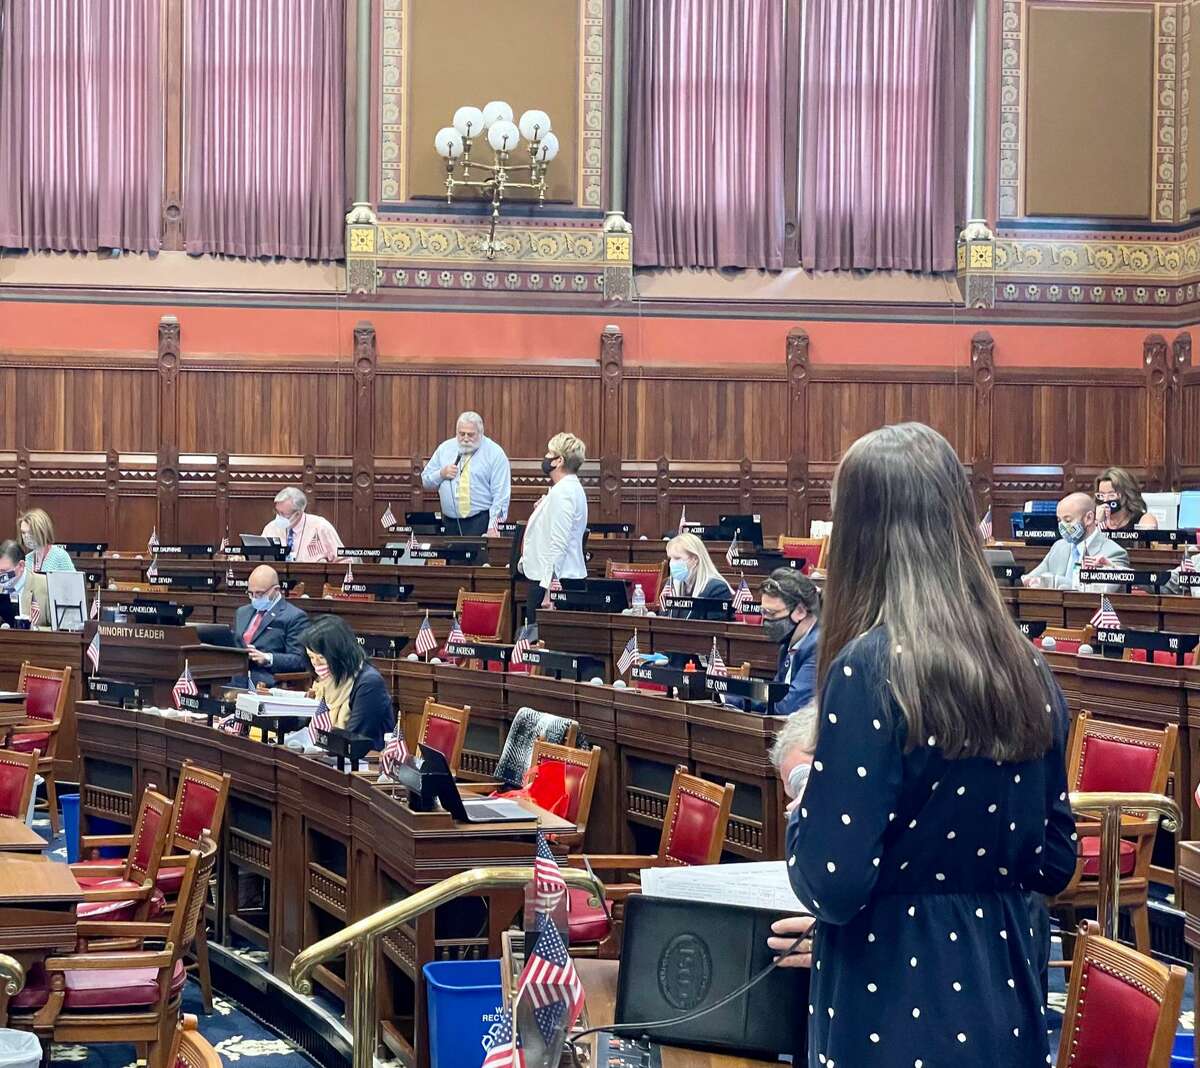 Rep. Jillian Gilchrest, D-West Hartford, defending the pregnancy crisis center bill in an exchange with Rep. Charles Ferraro, R-West Haven, on Wednesday.